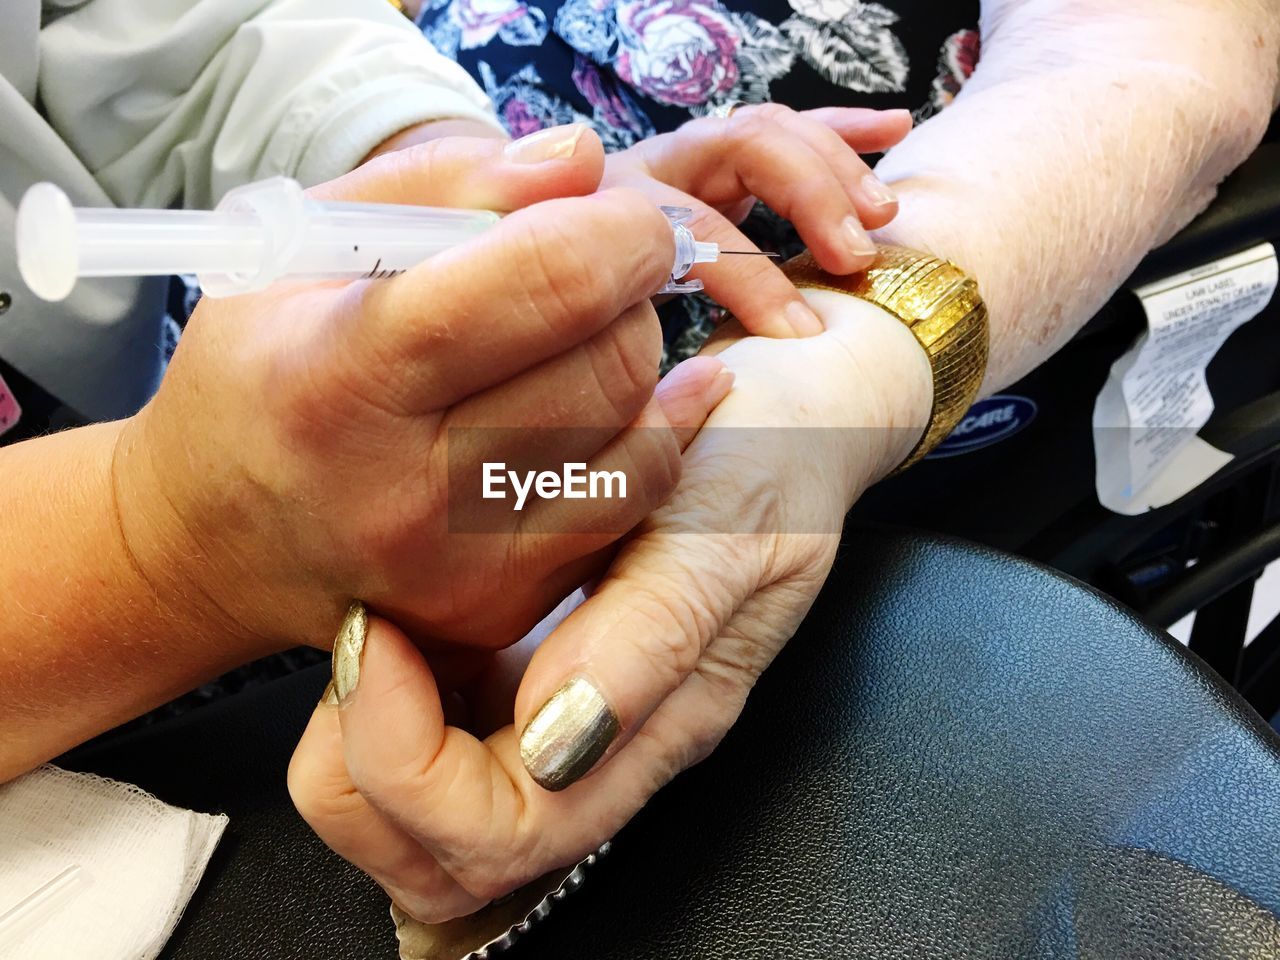 Cropped image of doctor injecting senior female patient